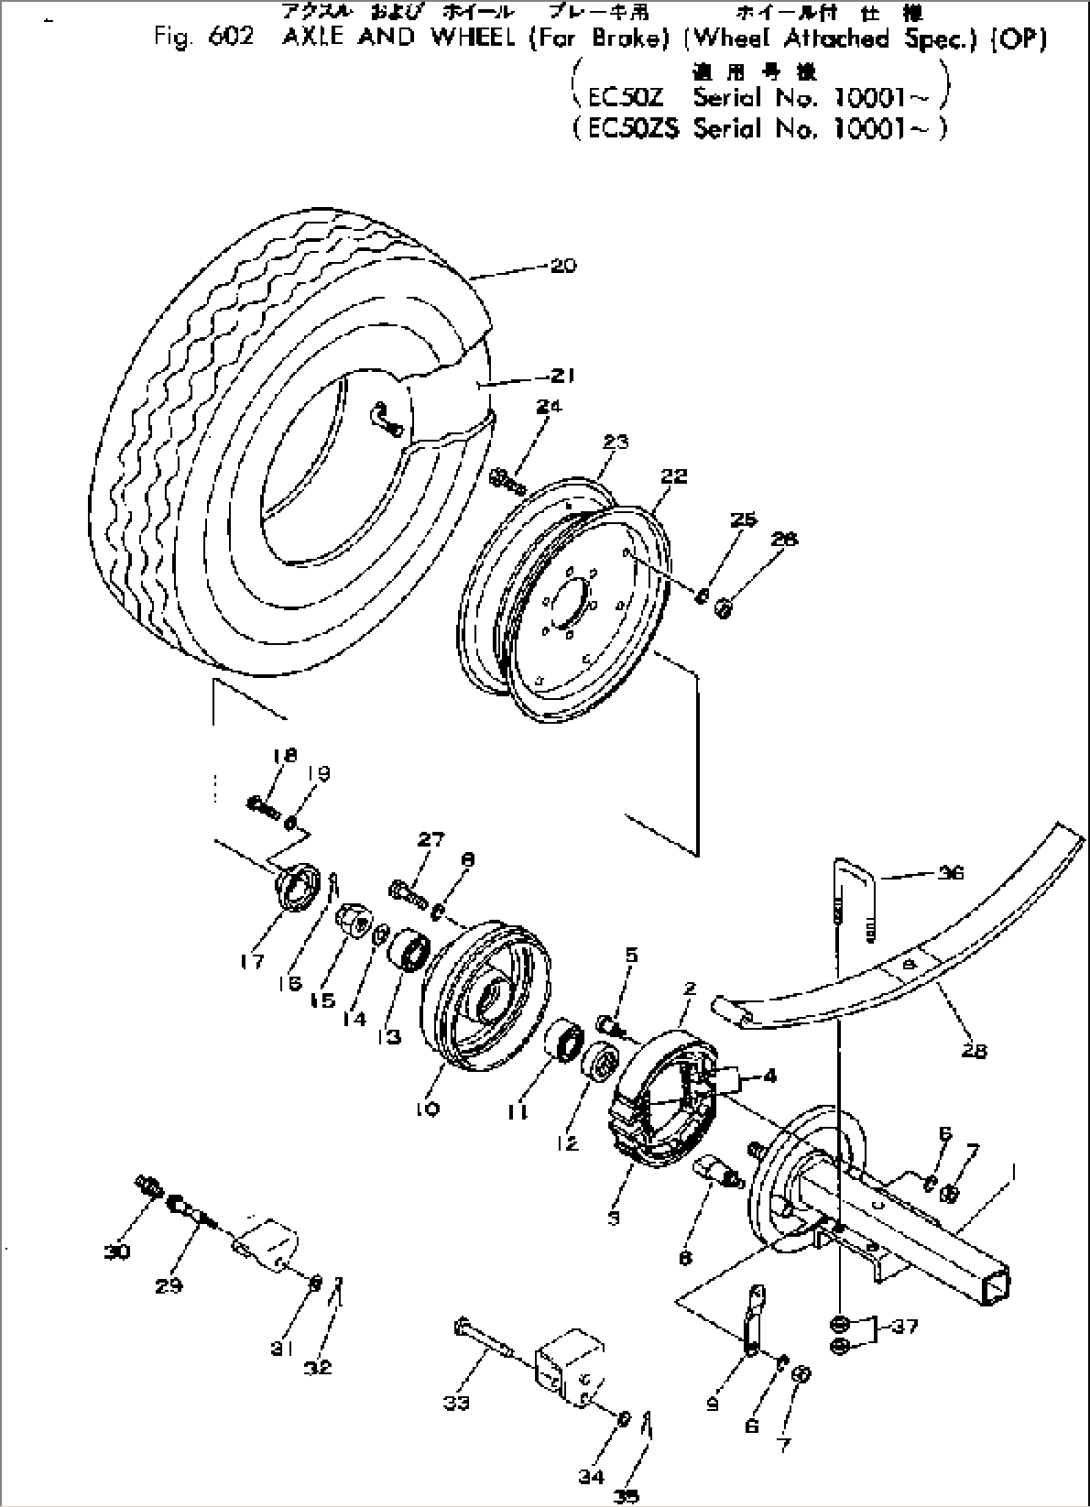 AXLE AND WHEEL (FOR BRAKE)(WHEEL ATTACHED SPEC.)